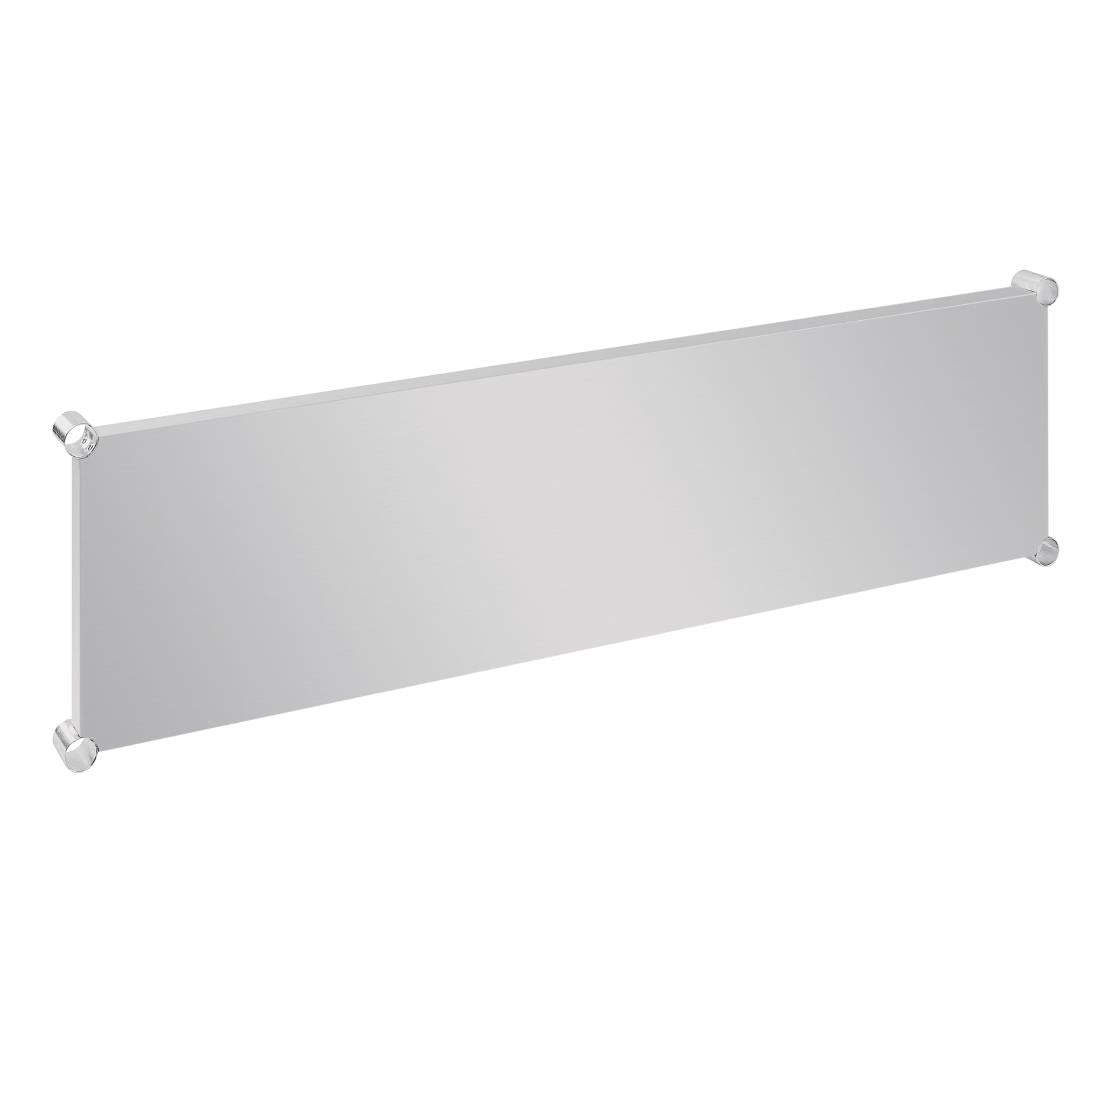 CP834 Vogue Steel Table Shelf 1800x600mm JD Catering Equipment Solutions Ltd